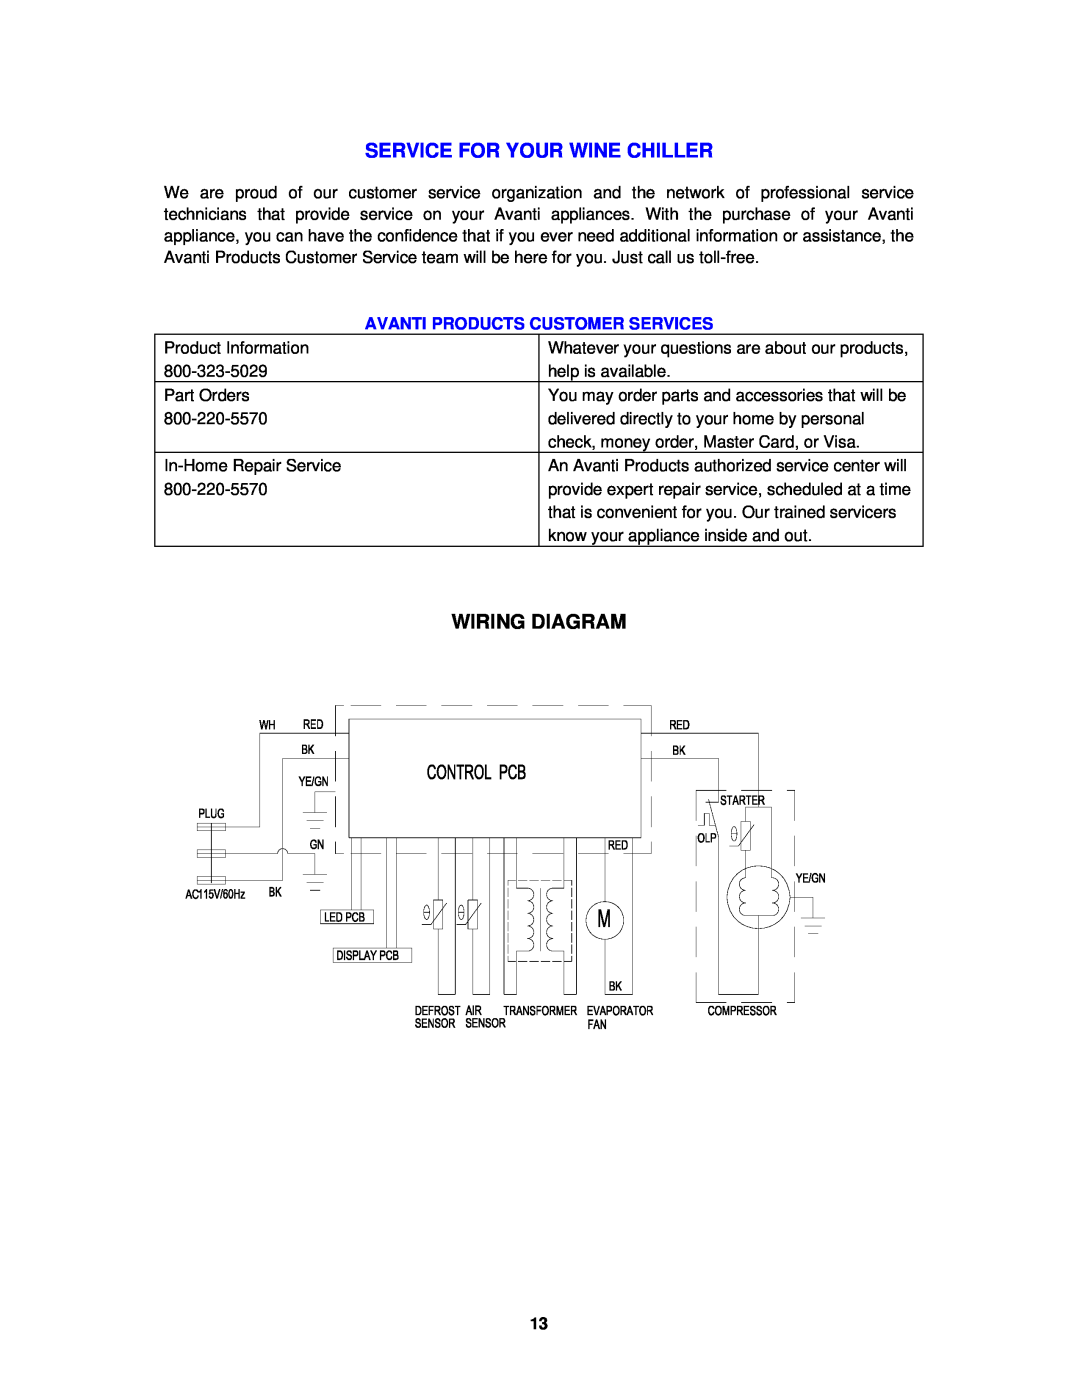 Avanti WC400SS instruction manual Service For Your Wine Chiller, Wiring Diagram, Avanti Products Customer Services 